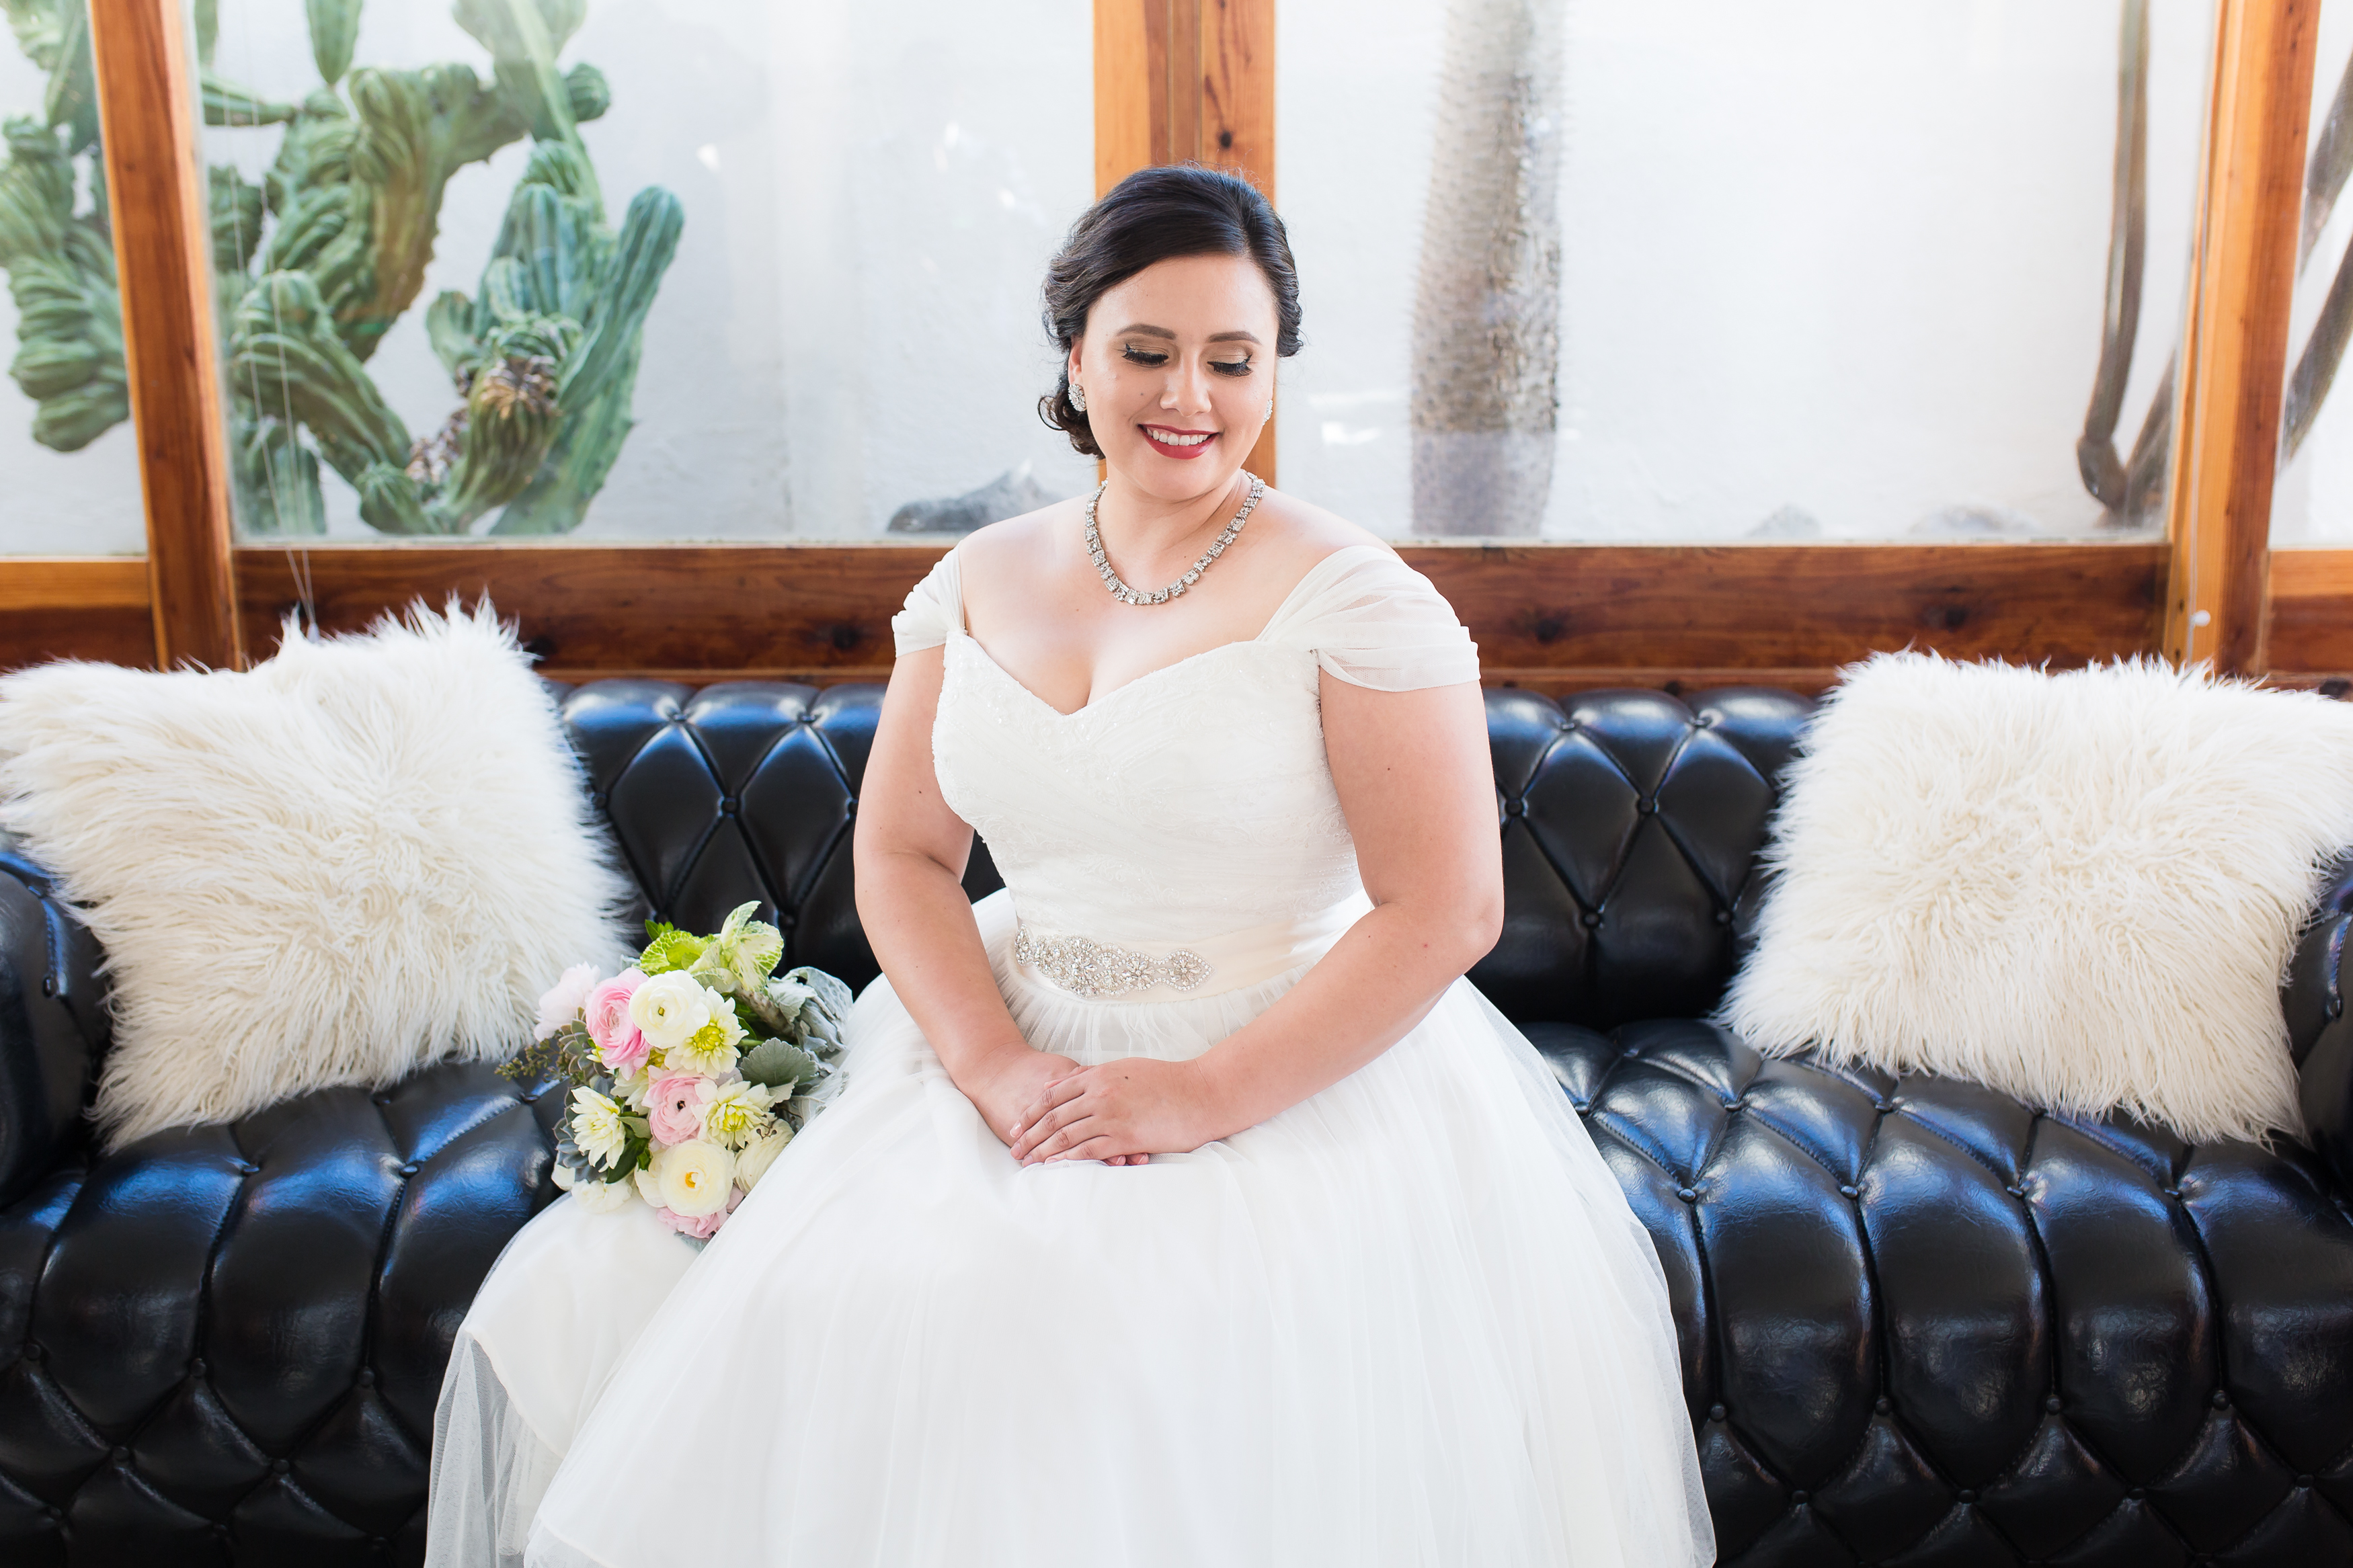 Bride sitting on leather couch in wedding dress looking over shoulder